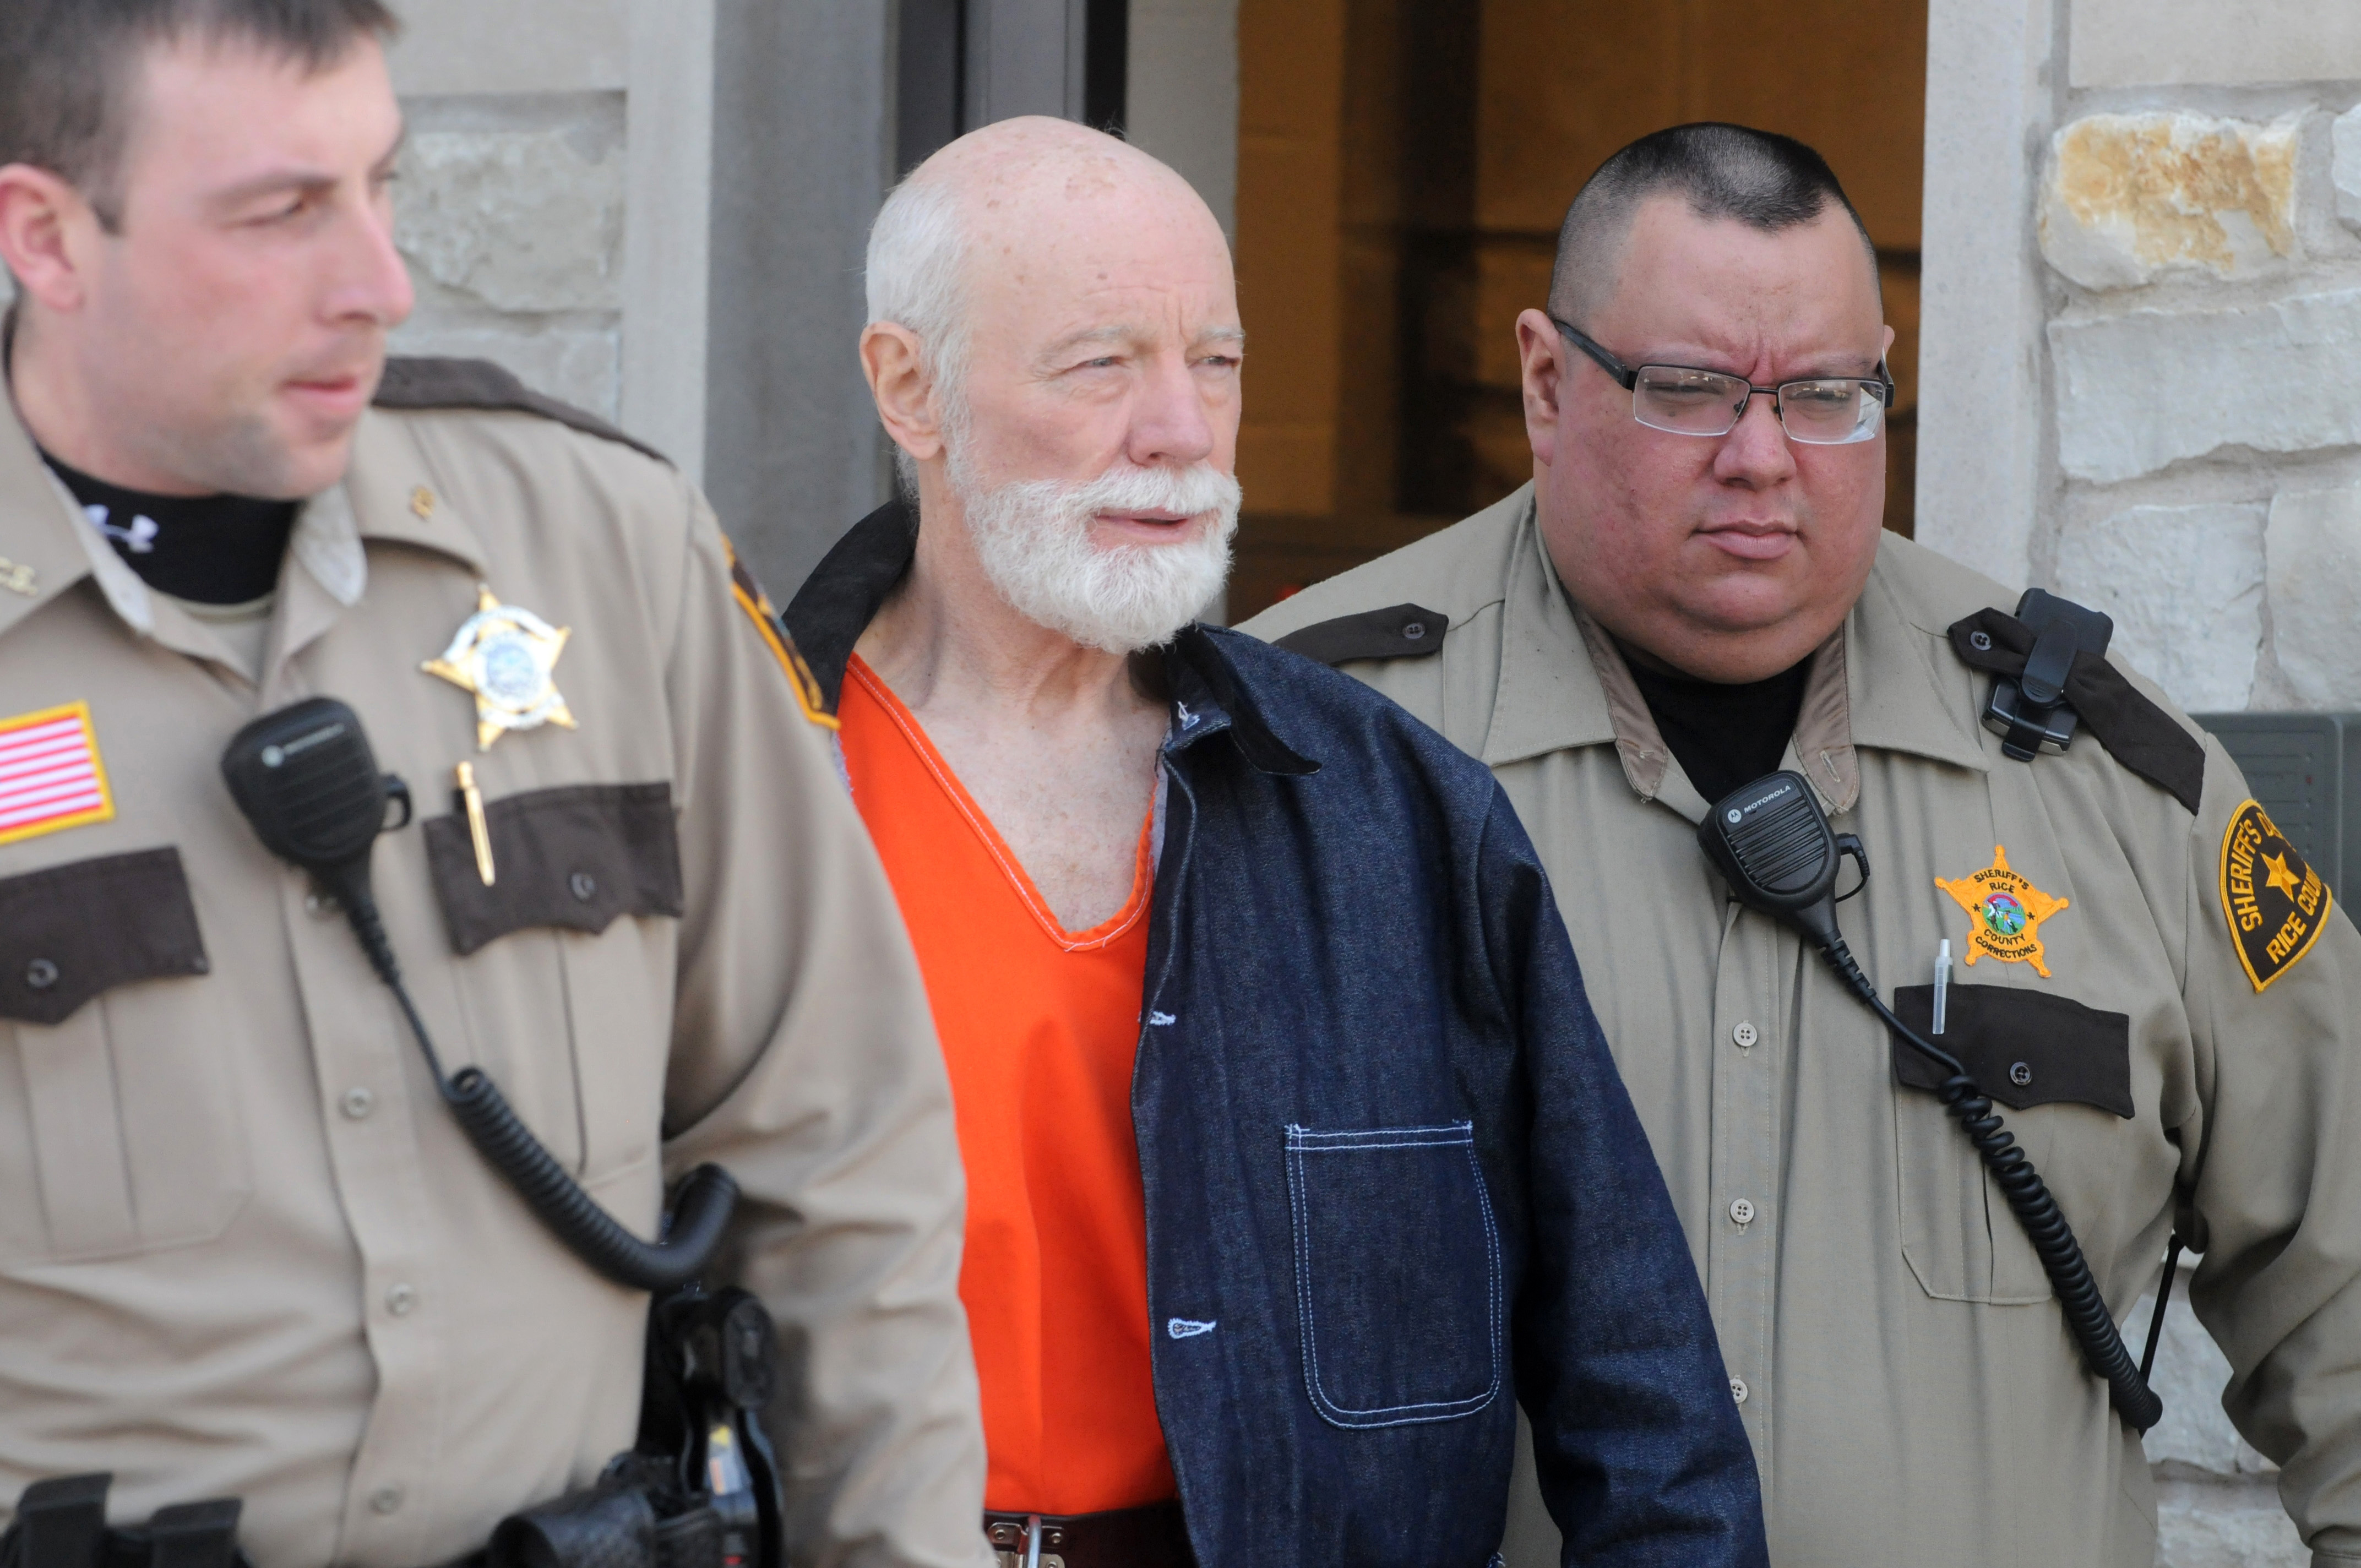 Lynn Seibel is escorted out of the Rice County Courthouse on Tuesday, Feb. 26, 2013, after his first appearance on 17 felony charges, in Faribault, Minn. A judge set bail at $200,000 with no conditions or $100,000 with conditions. (AP Photo/The Daily News, Cristeta Boarini)